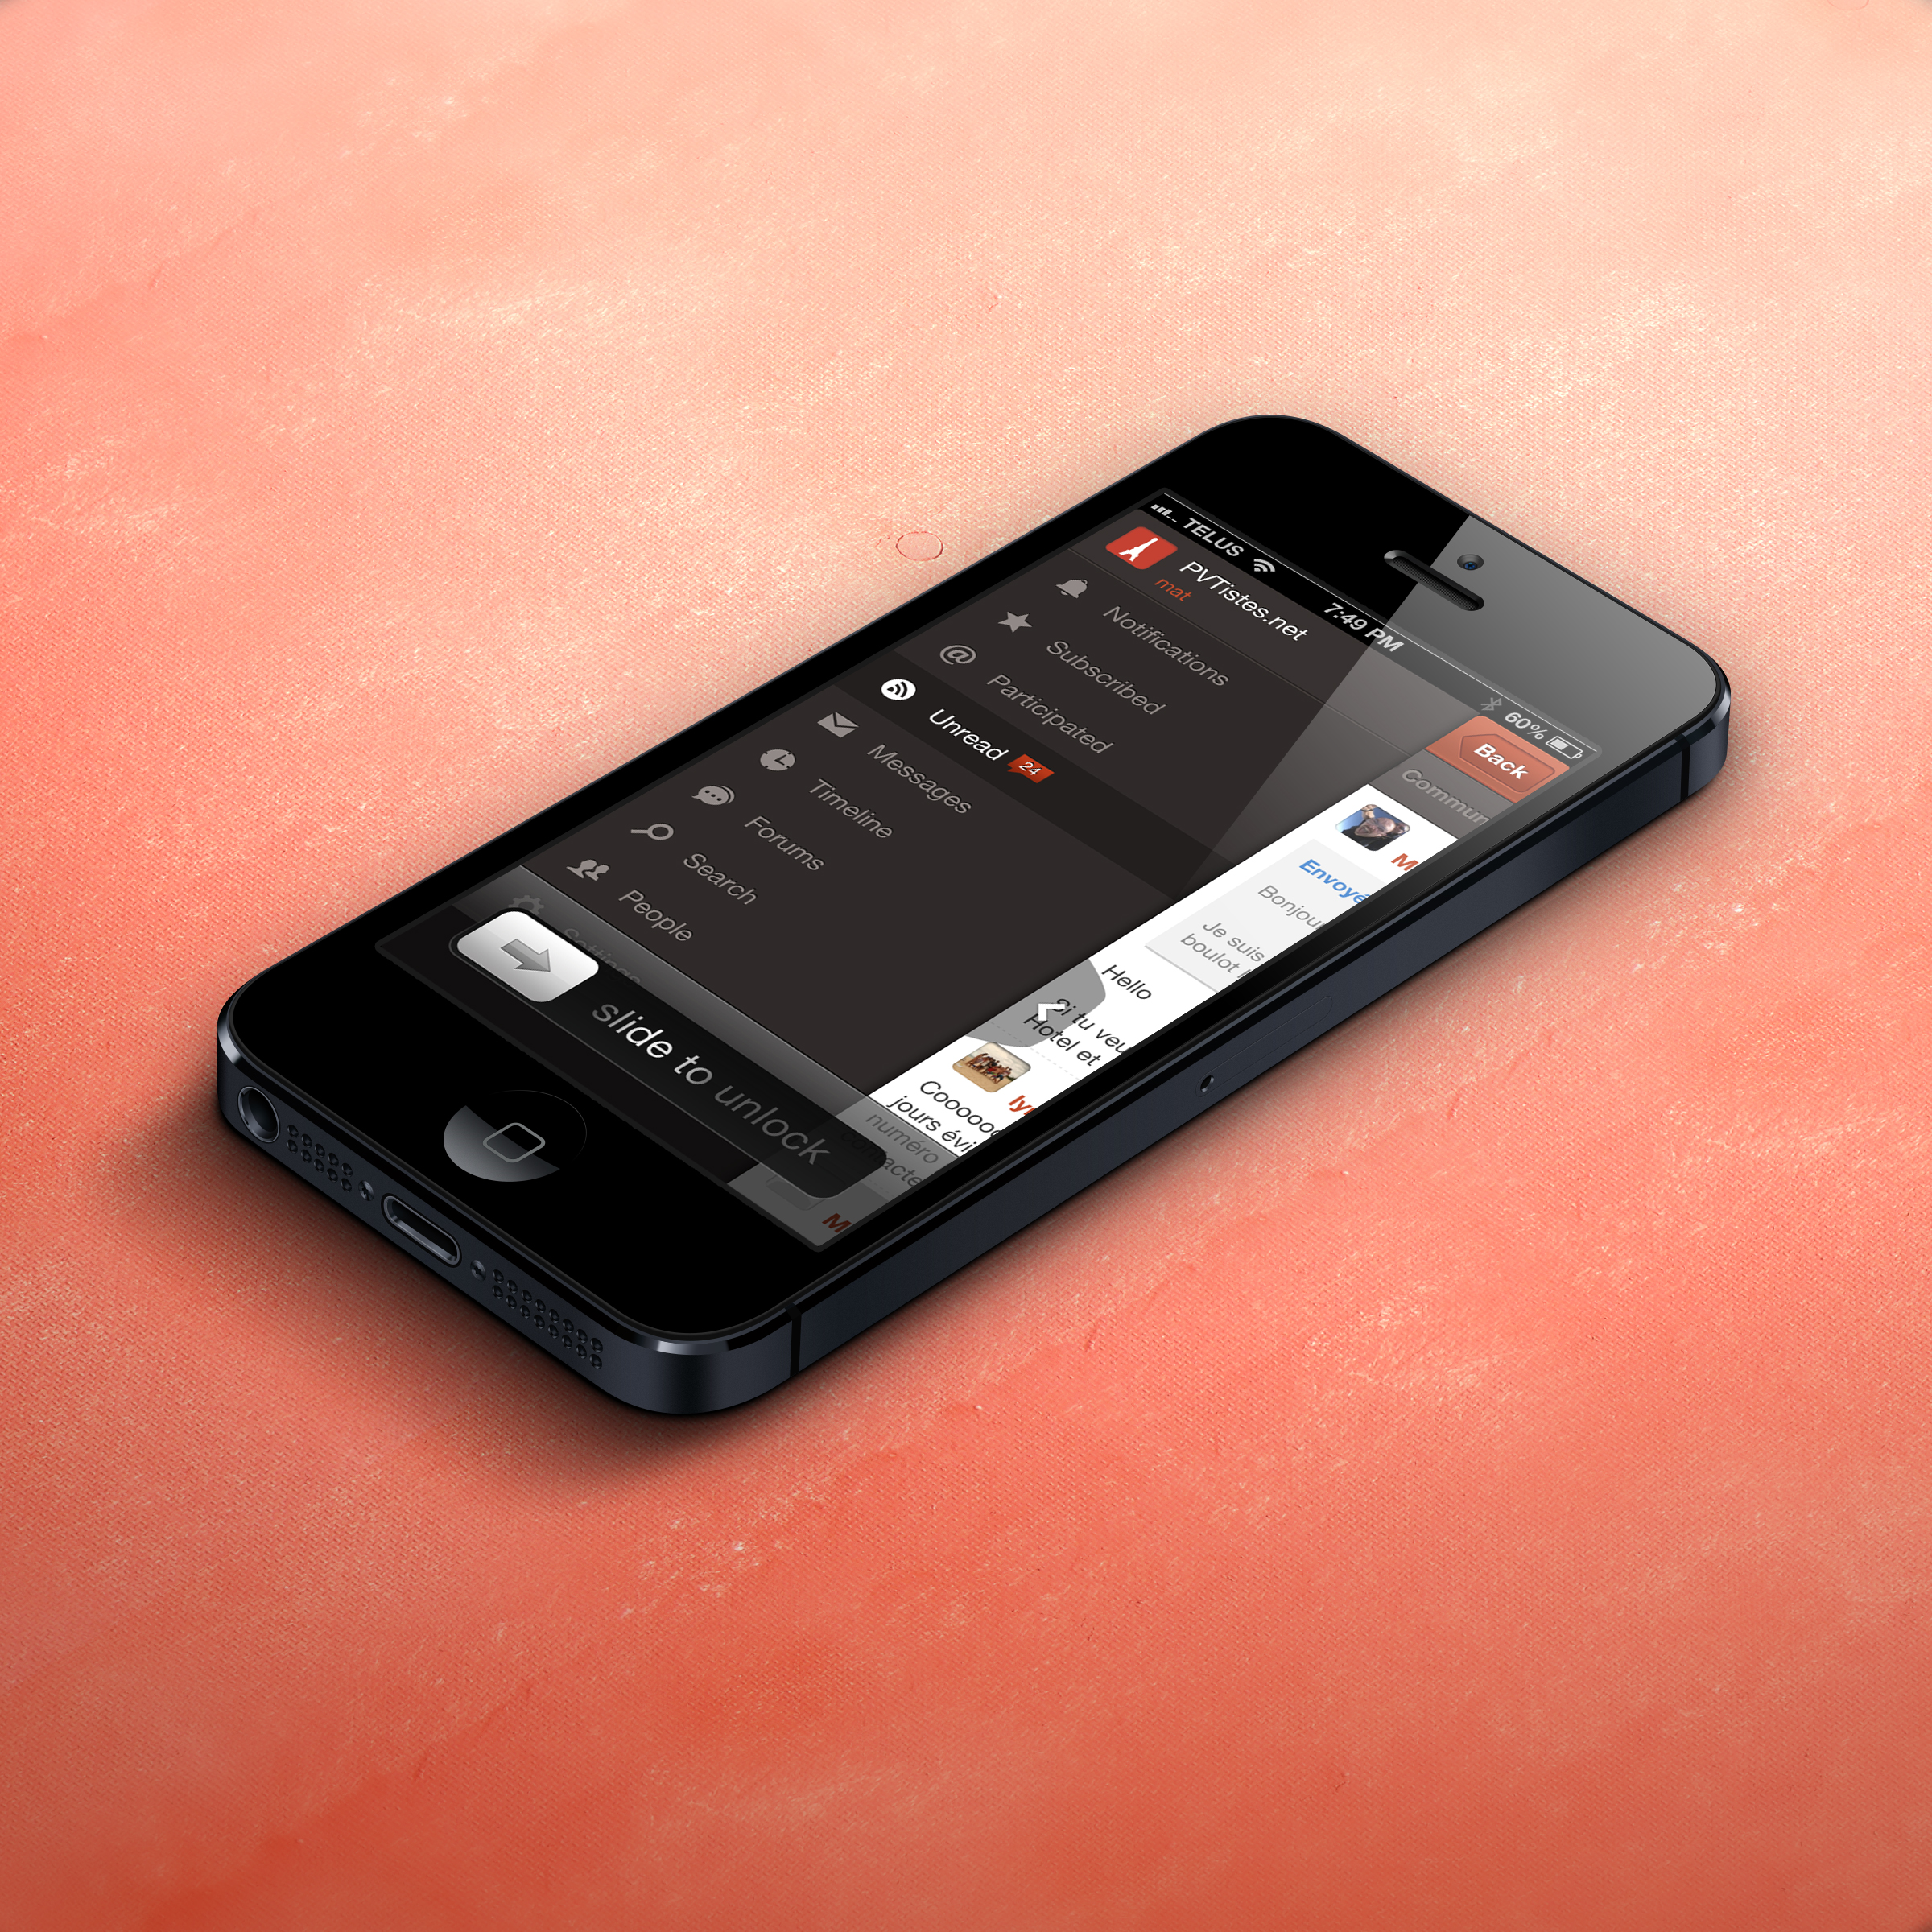 Nom : iPhone-5-3D-view-MockUp.jpg
Affichages : 1016
Taille : 4,59 Mo